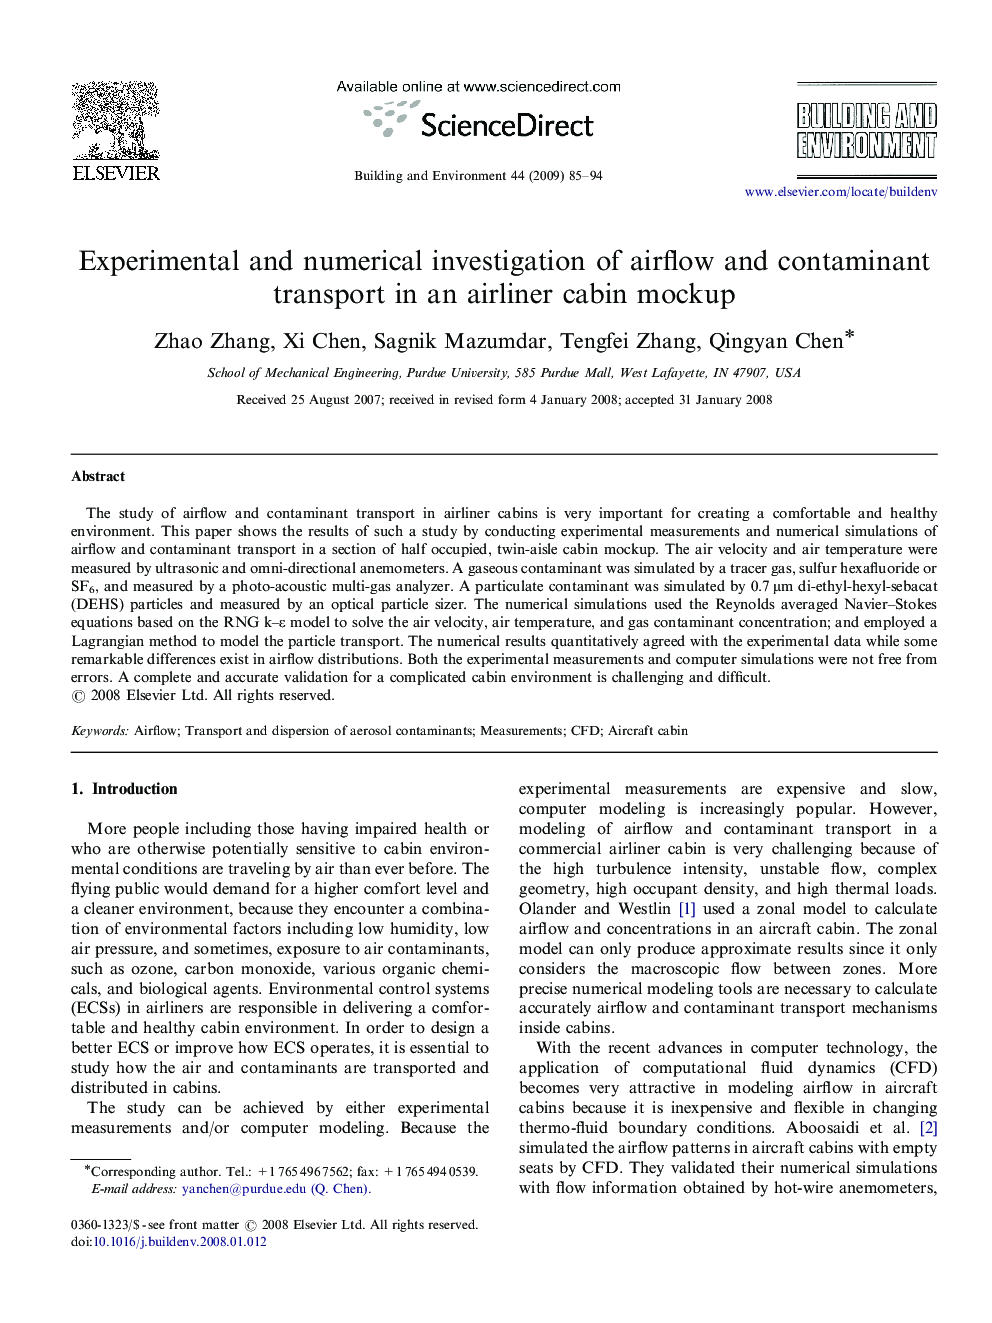 Experimental and numerical investigation of airflow and contaminant transport in an airliner cabin mockup